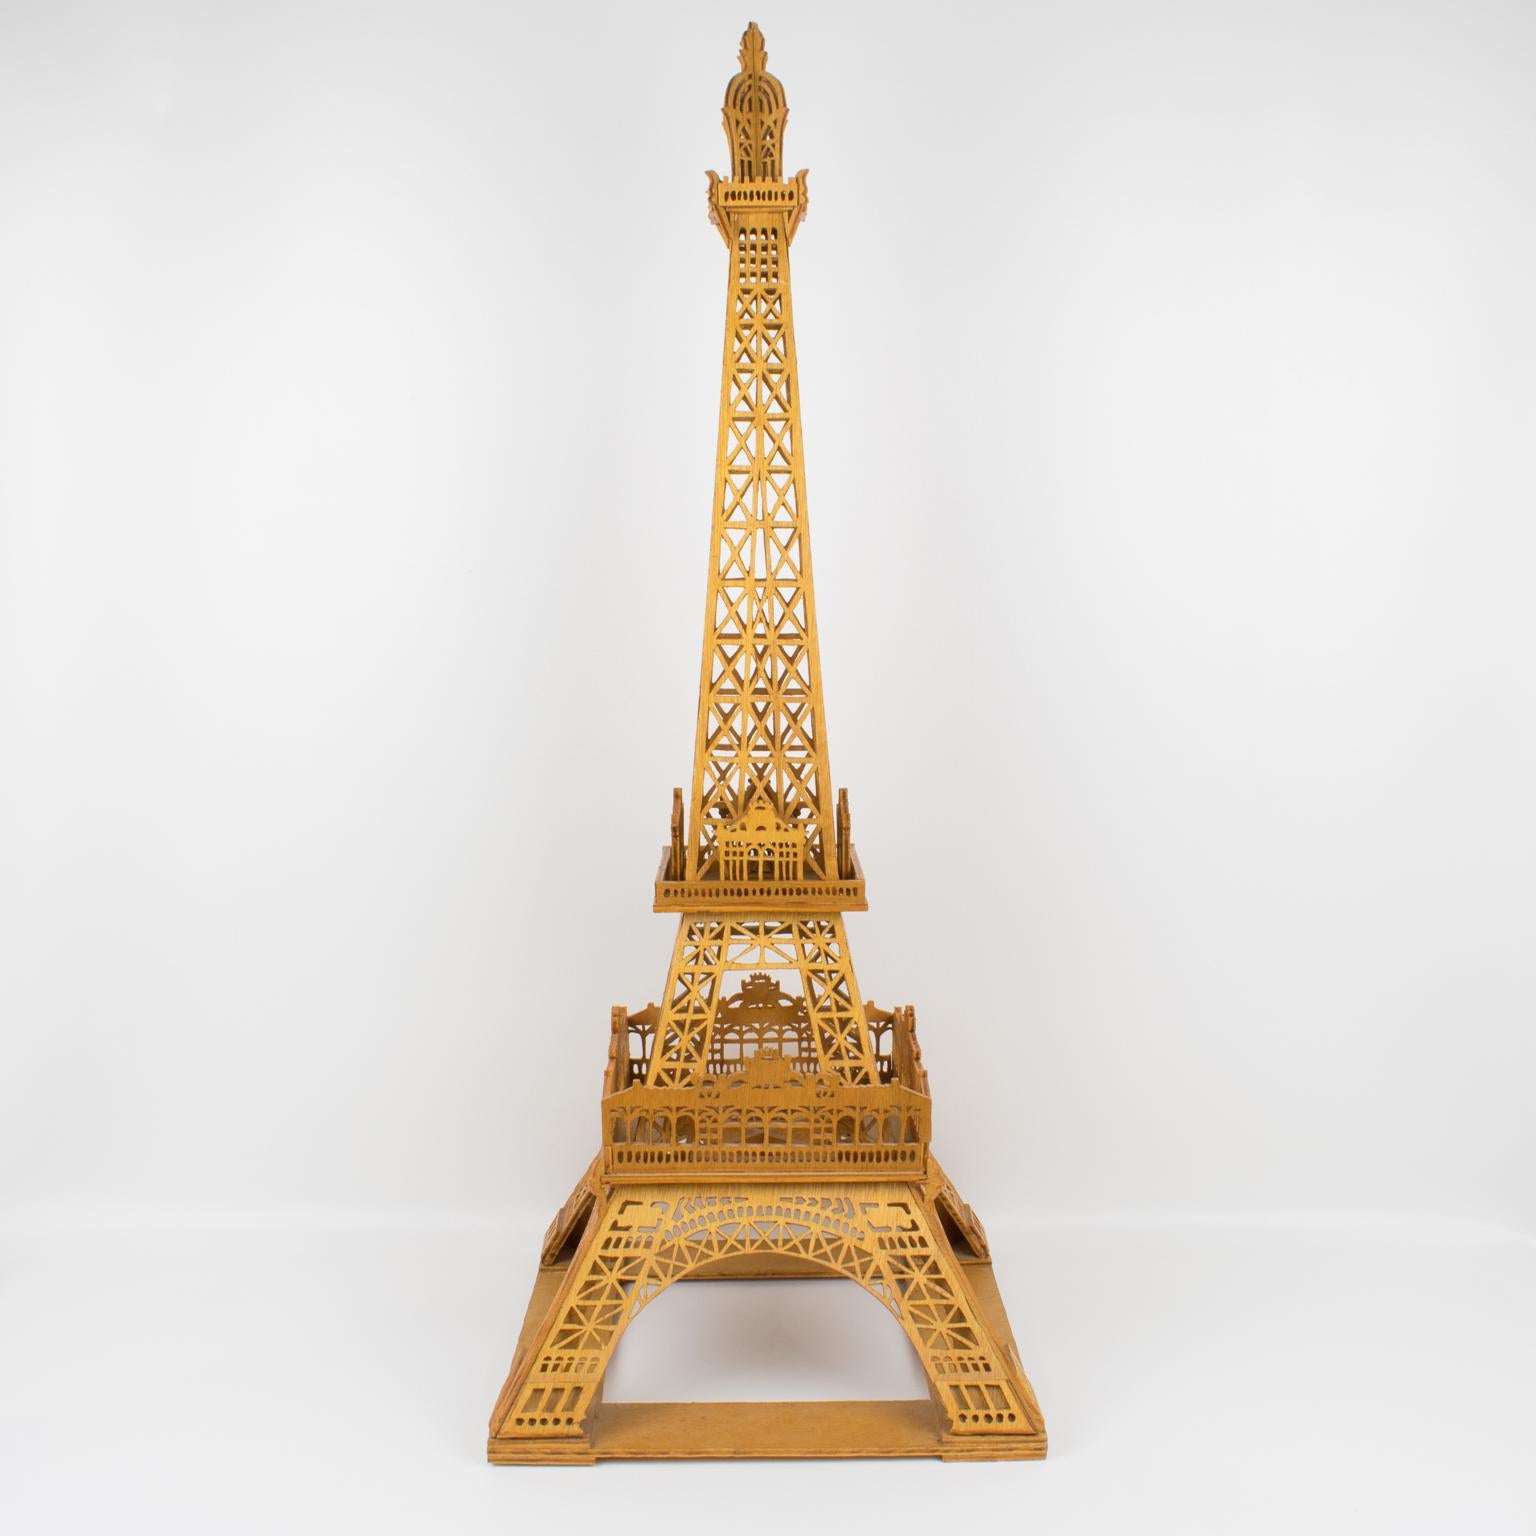 This very decorative model features the iconic Eiffel Tower crafted of plywood as a tall-scale miniature sculpture. Apprentices or master craftsmen create unique architectural models to claim a title of mastery with their respective guilds.
Gustave